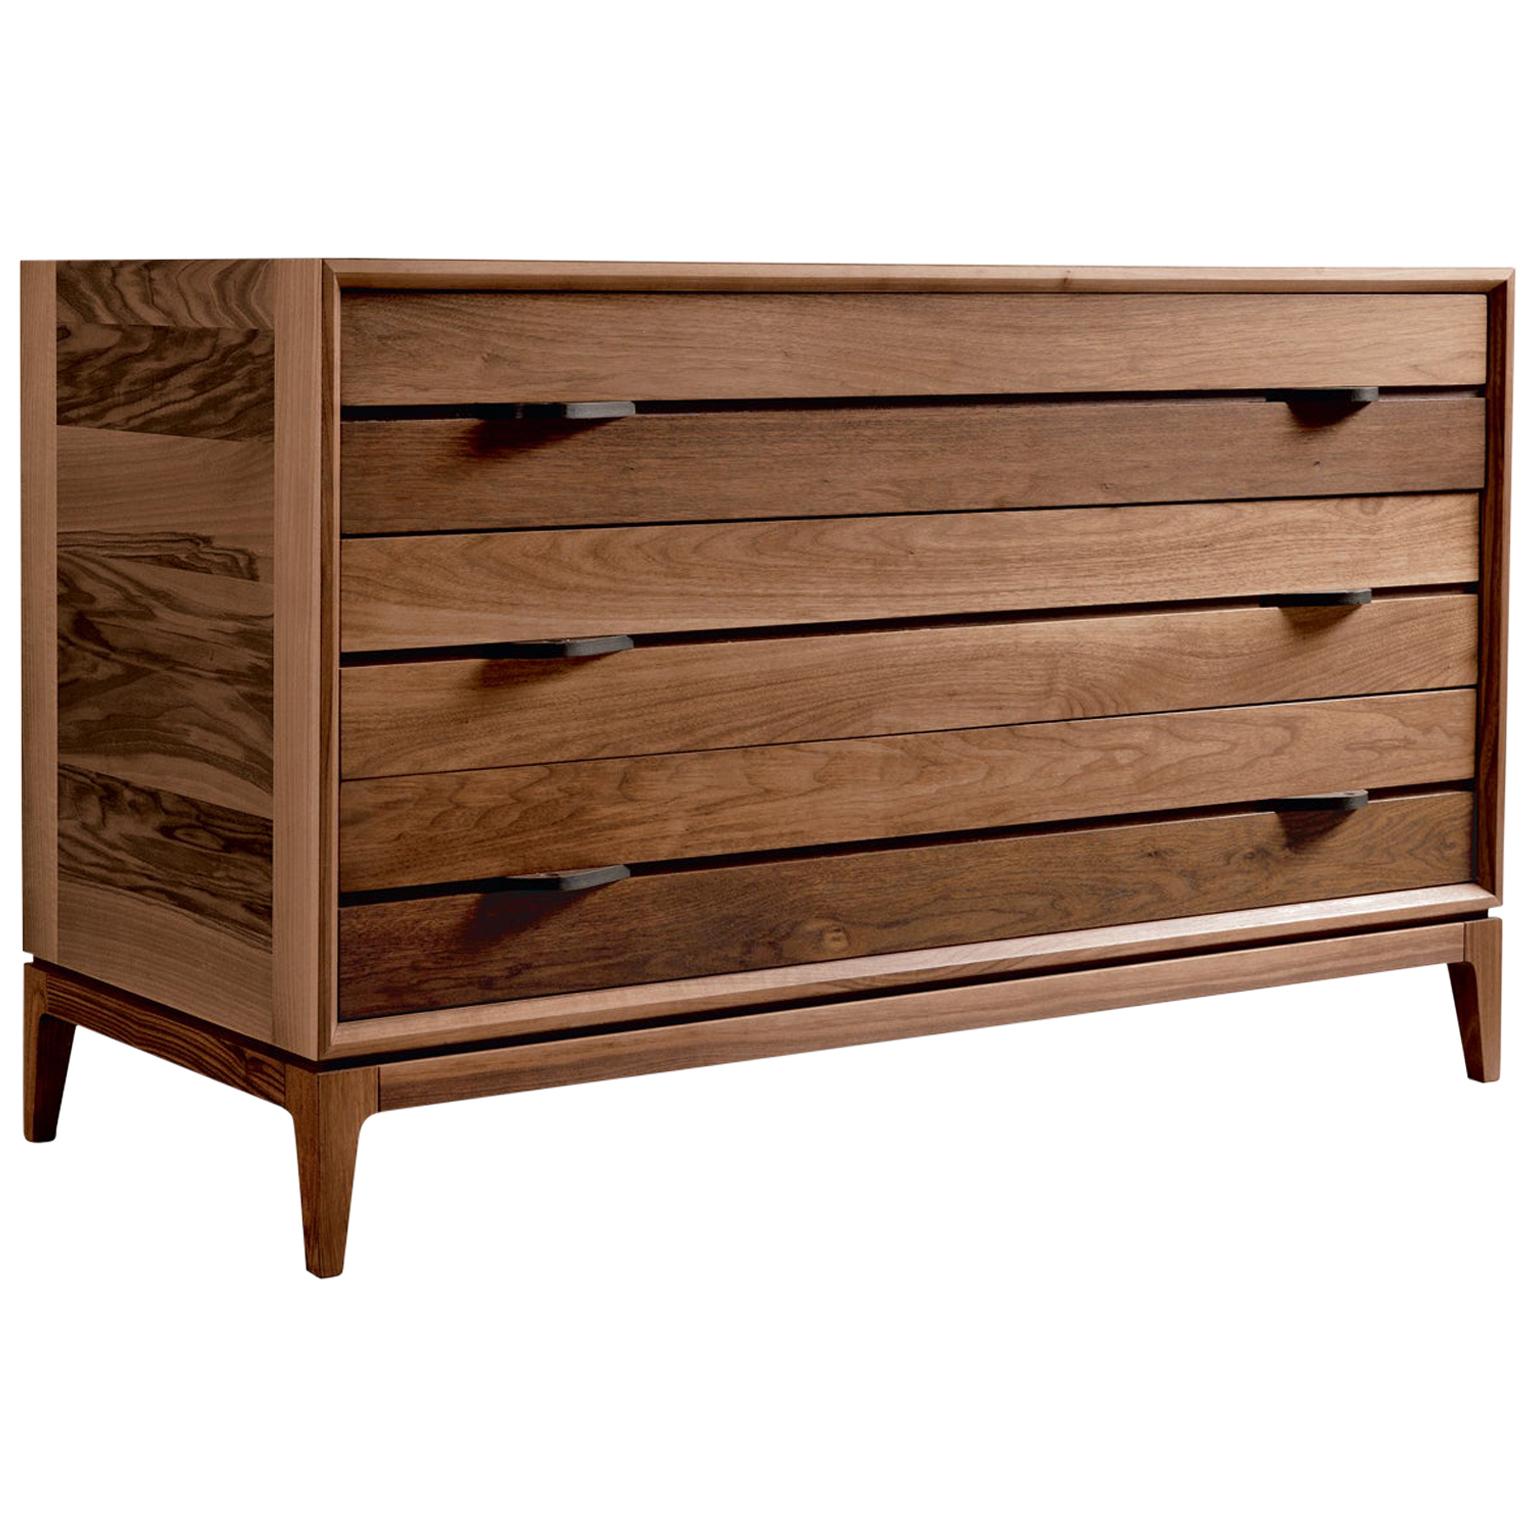 Binario Solid Wood Dresser, Walnut in Hand-Made Natural Finish, Contemporary For Sale